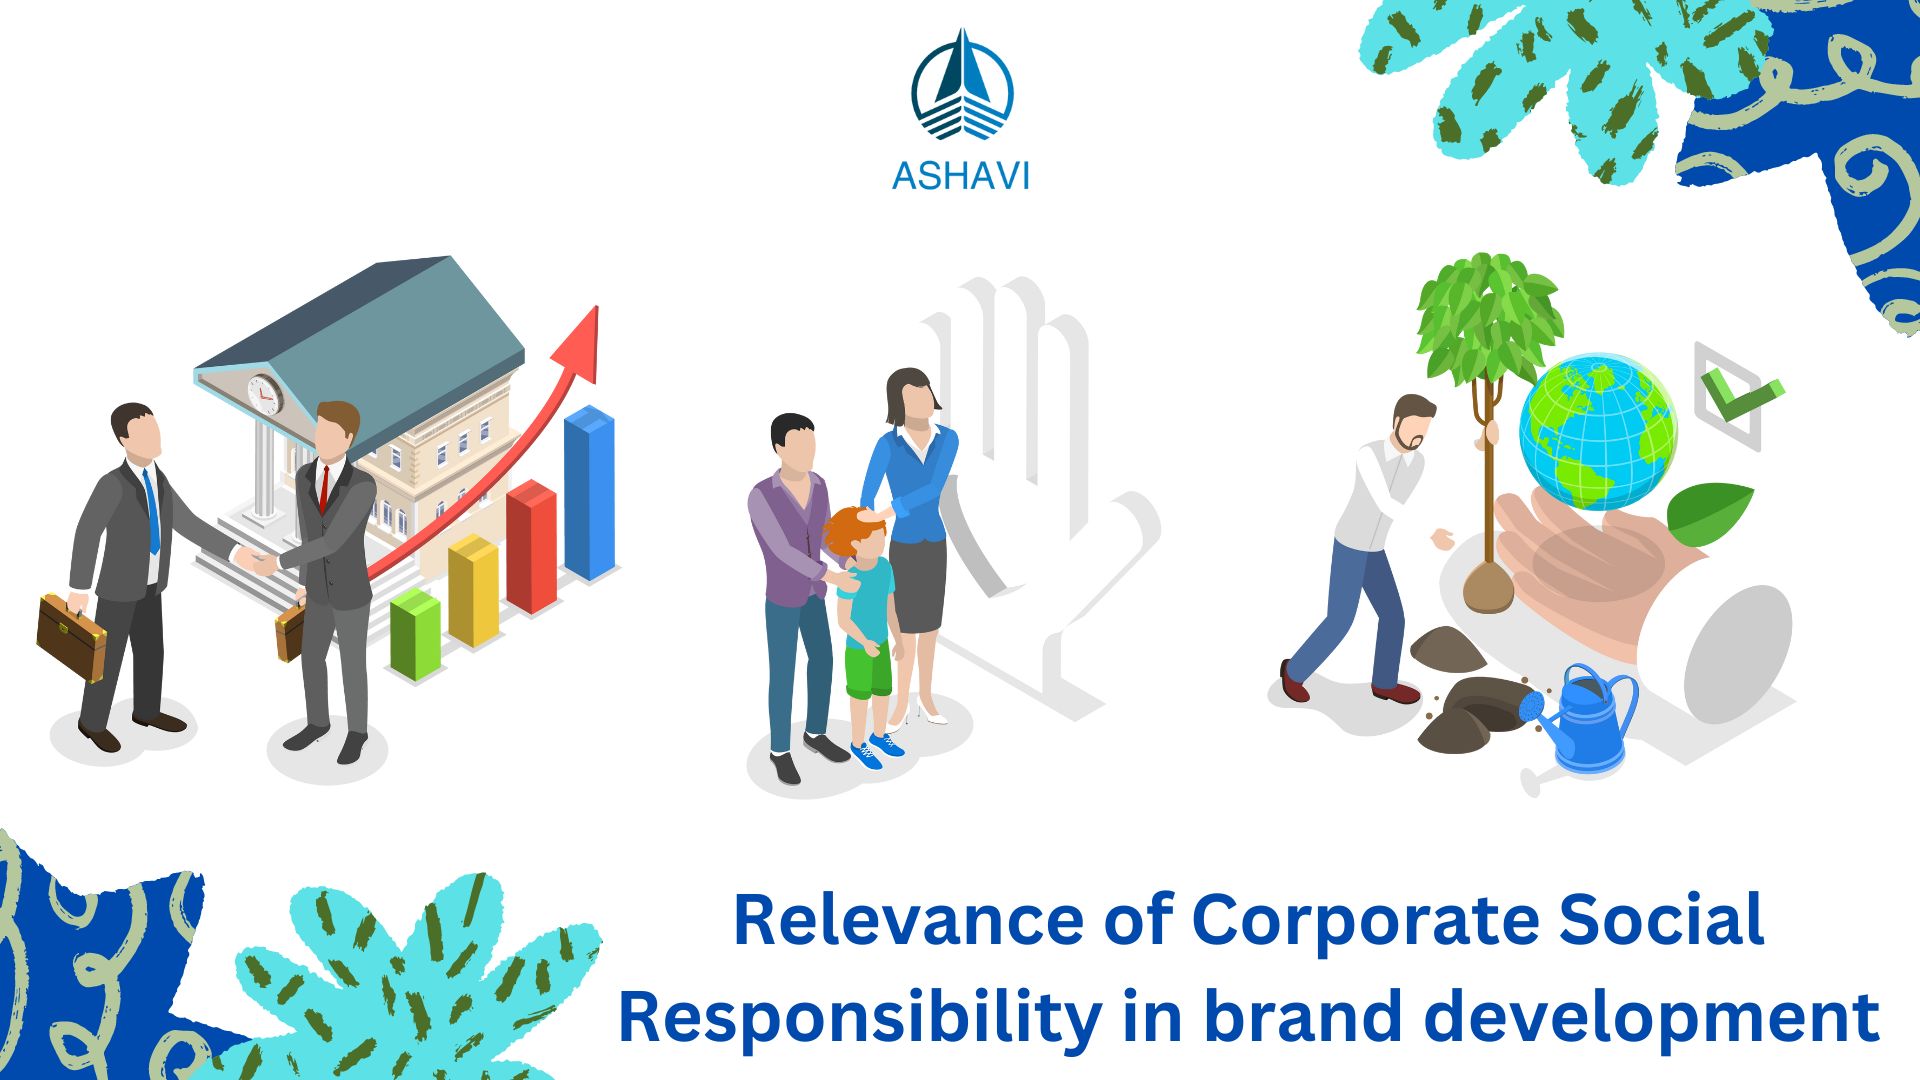 Relevance of Corporate Social Responsibility in brand development